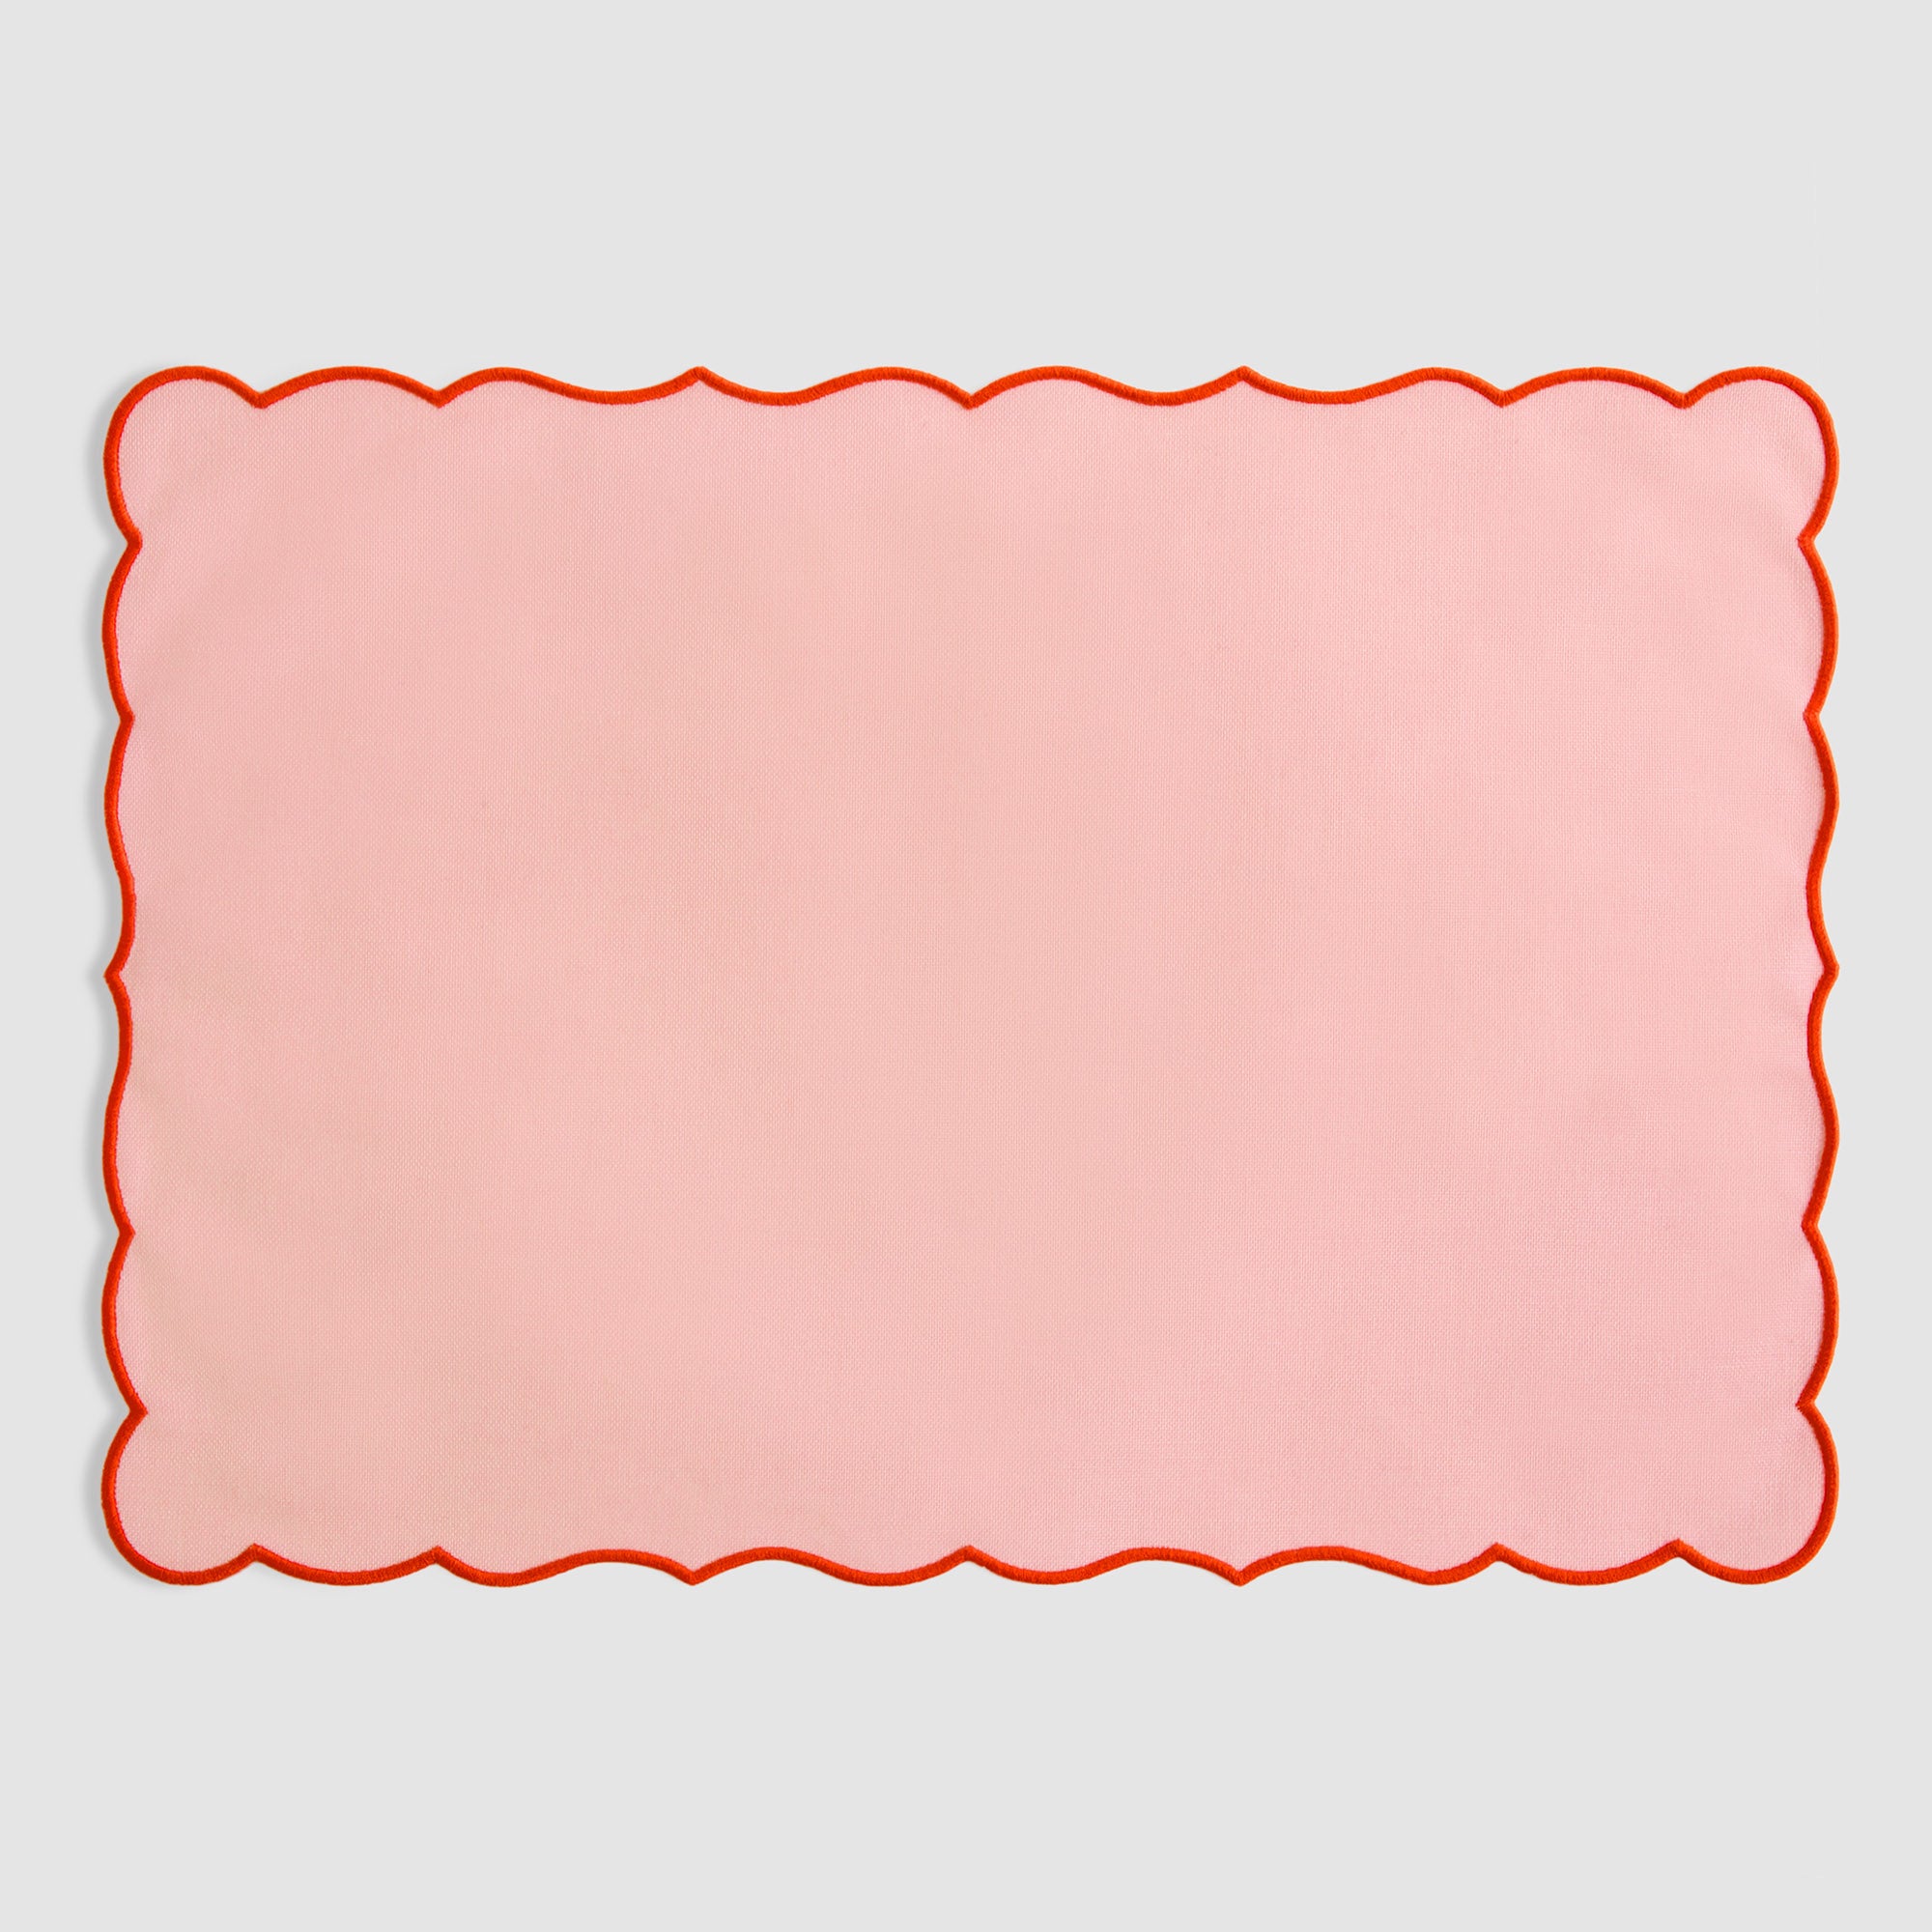 Scallop Edged Coated Placemat, Framboise – Z.d.G. by Zoë de Givenchy